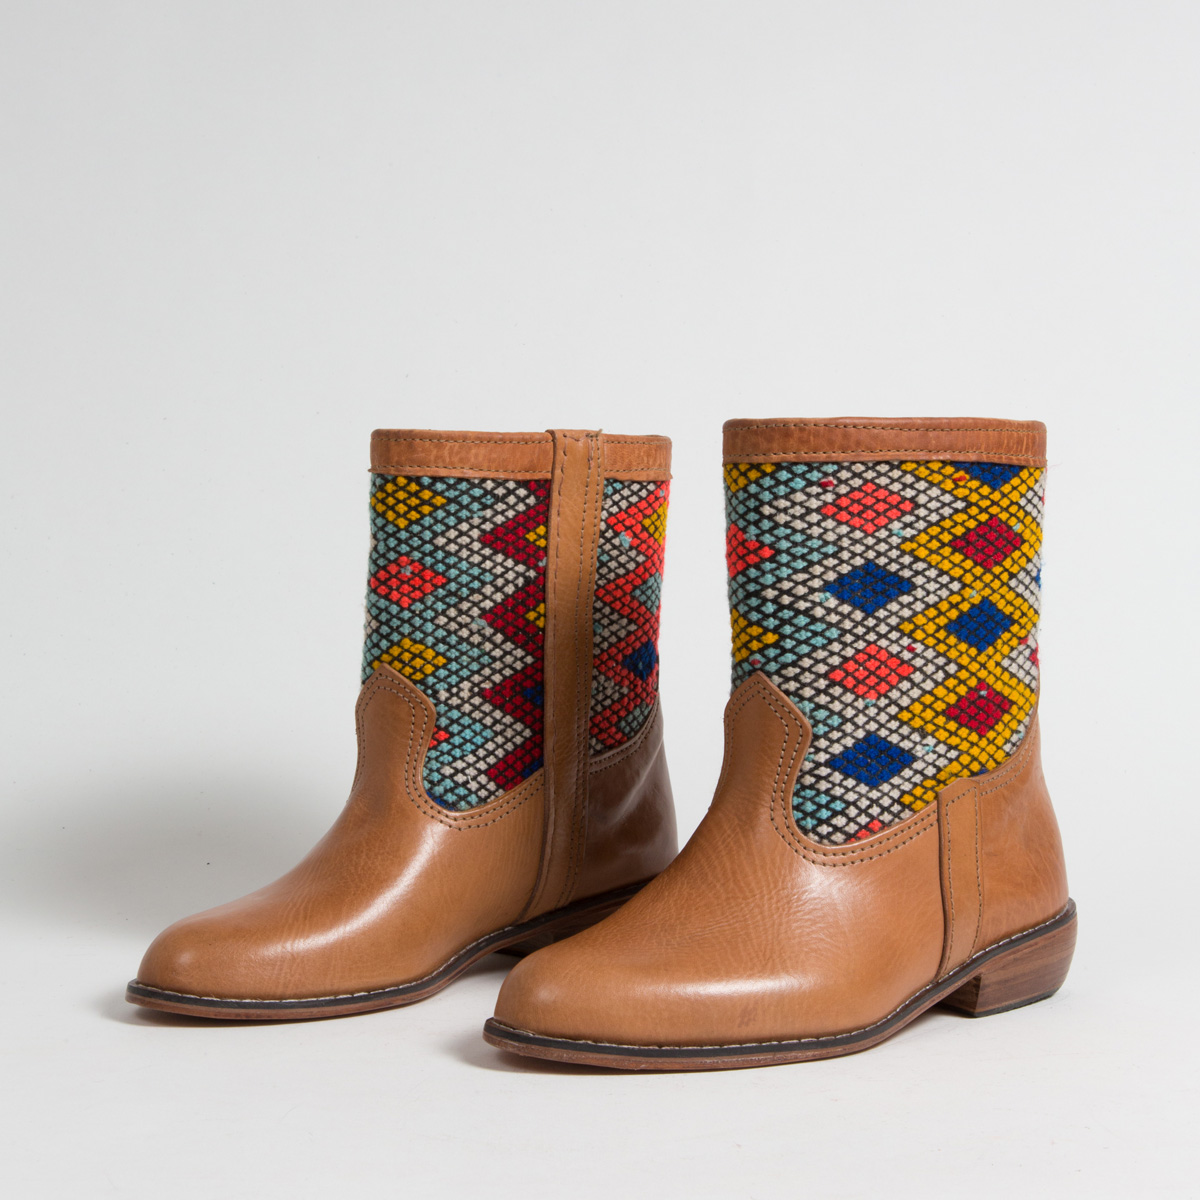 Bottines Kilim cuir mababouche artisanales (Réf. MOI-38)